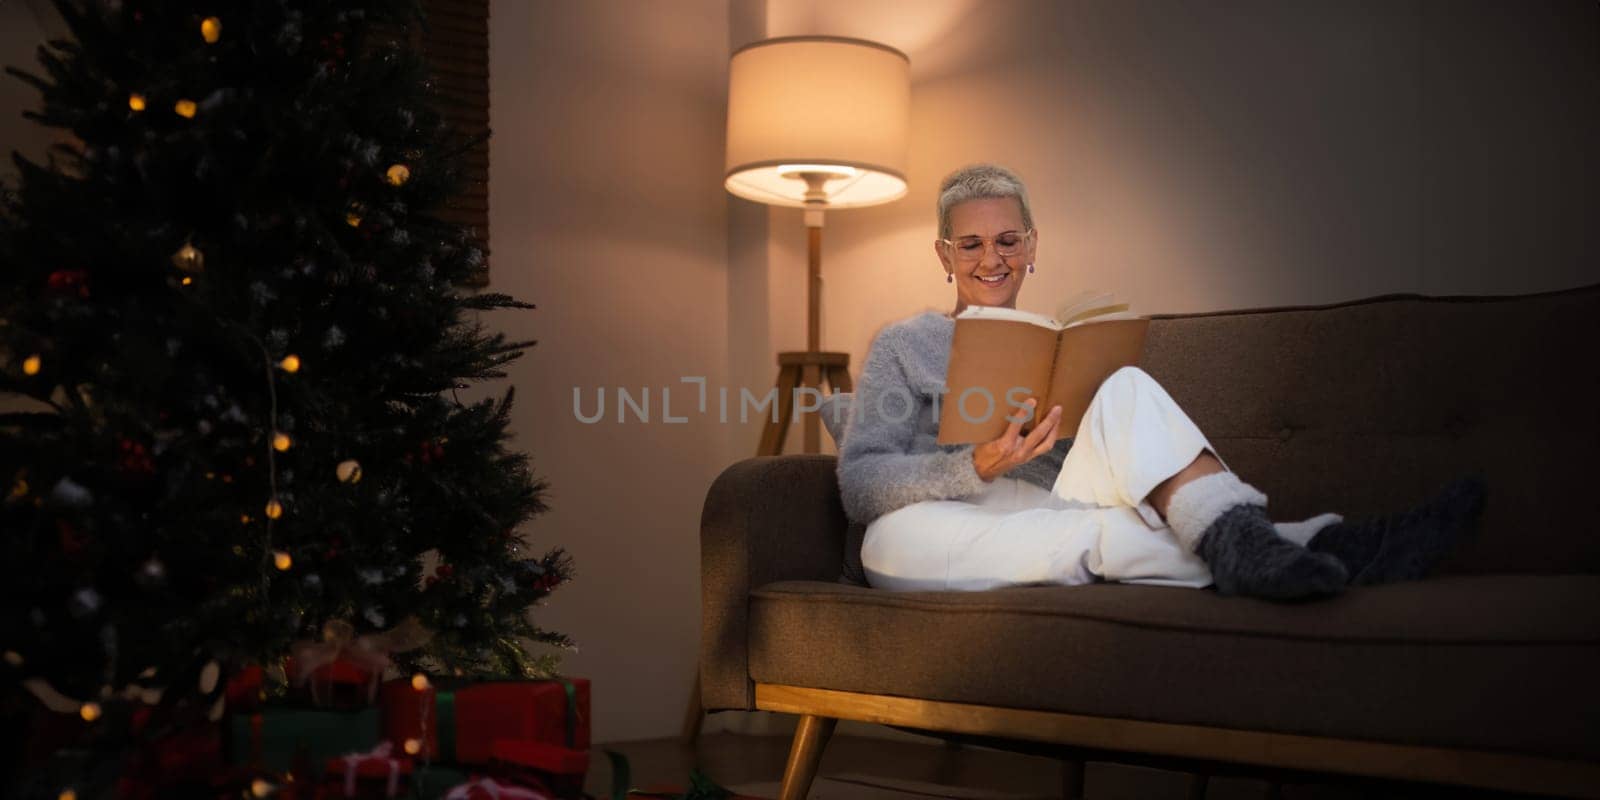 Smiling elderly woman with a cup of tea and a book relax in side of a decorated Christmas tree in living room.